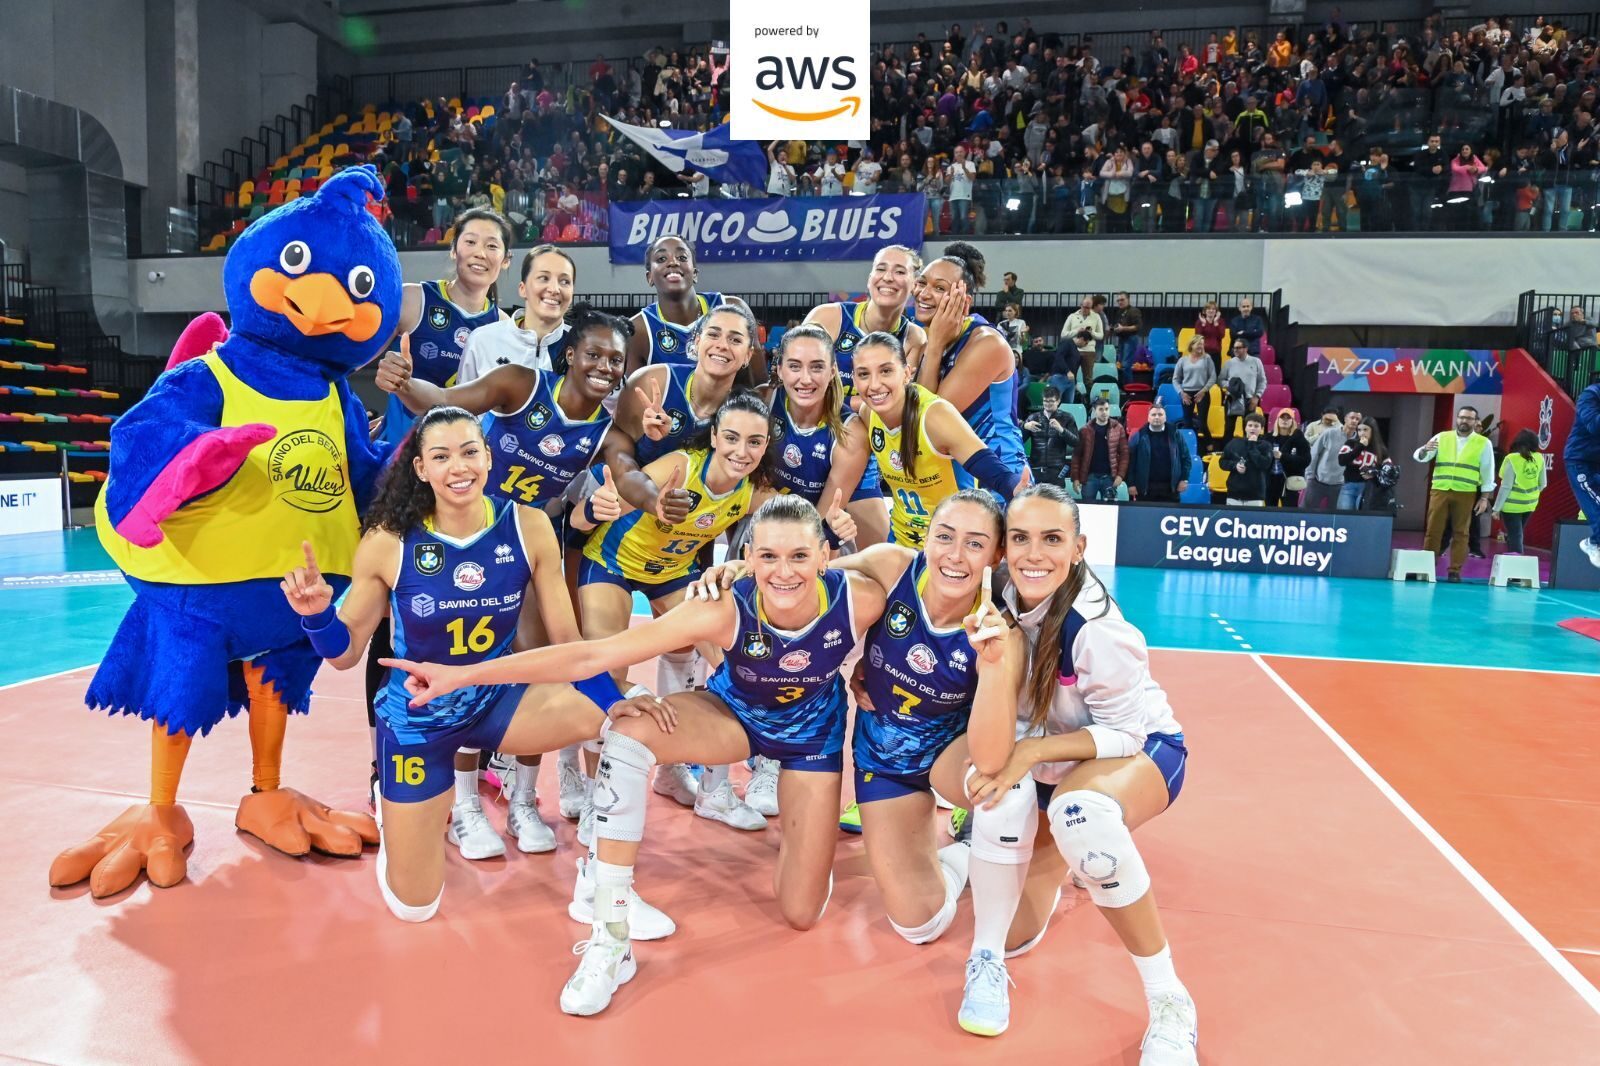 Sports data analytics company KINEXON is teaming with AWS and welcoming Italian volleyball team Scandicci as a flagship team to develop metrics specifically for women athletes.